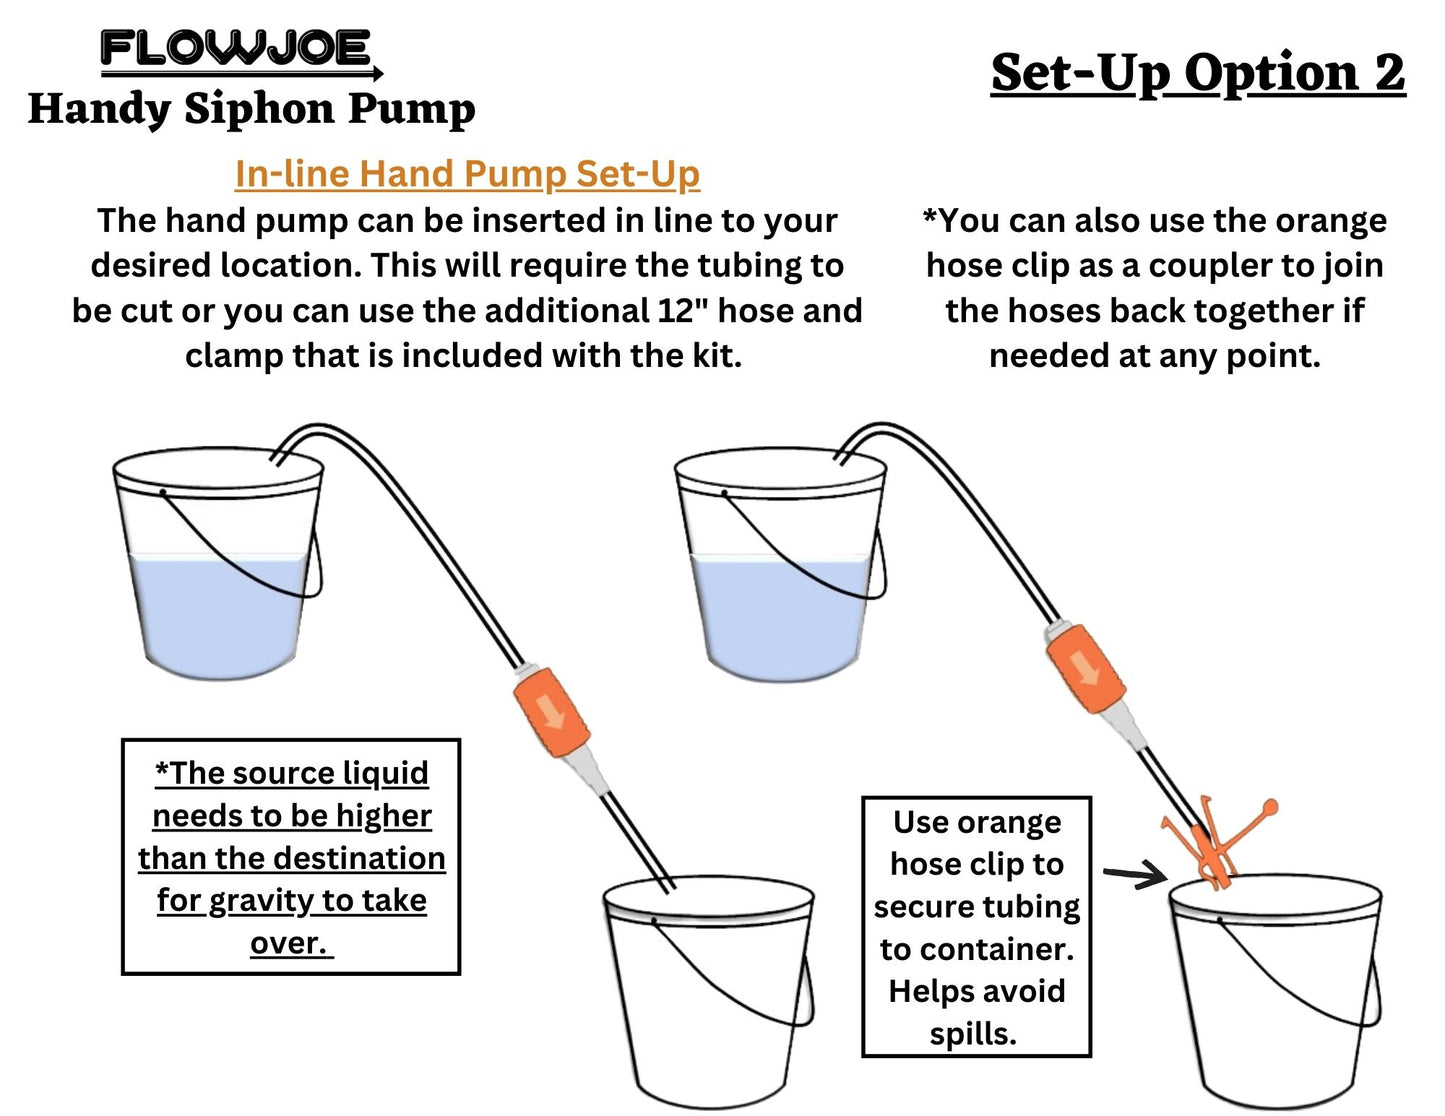 Handy siphon pump set up option 2 in-line hand pump with orange hose clip using provided American made hose 